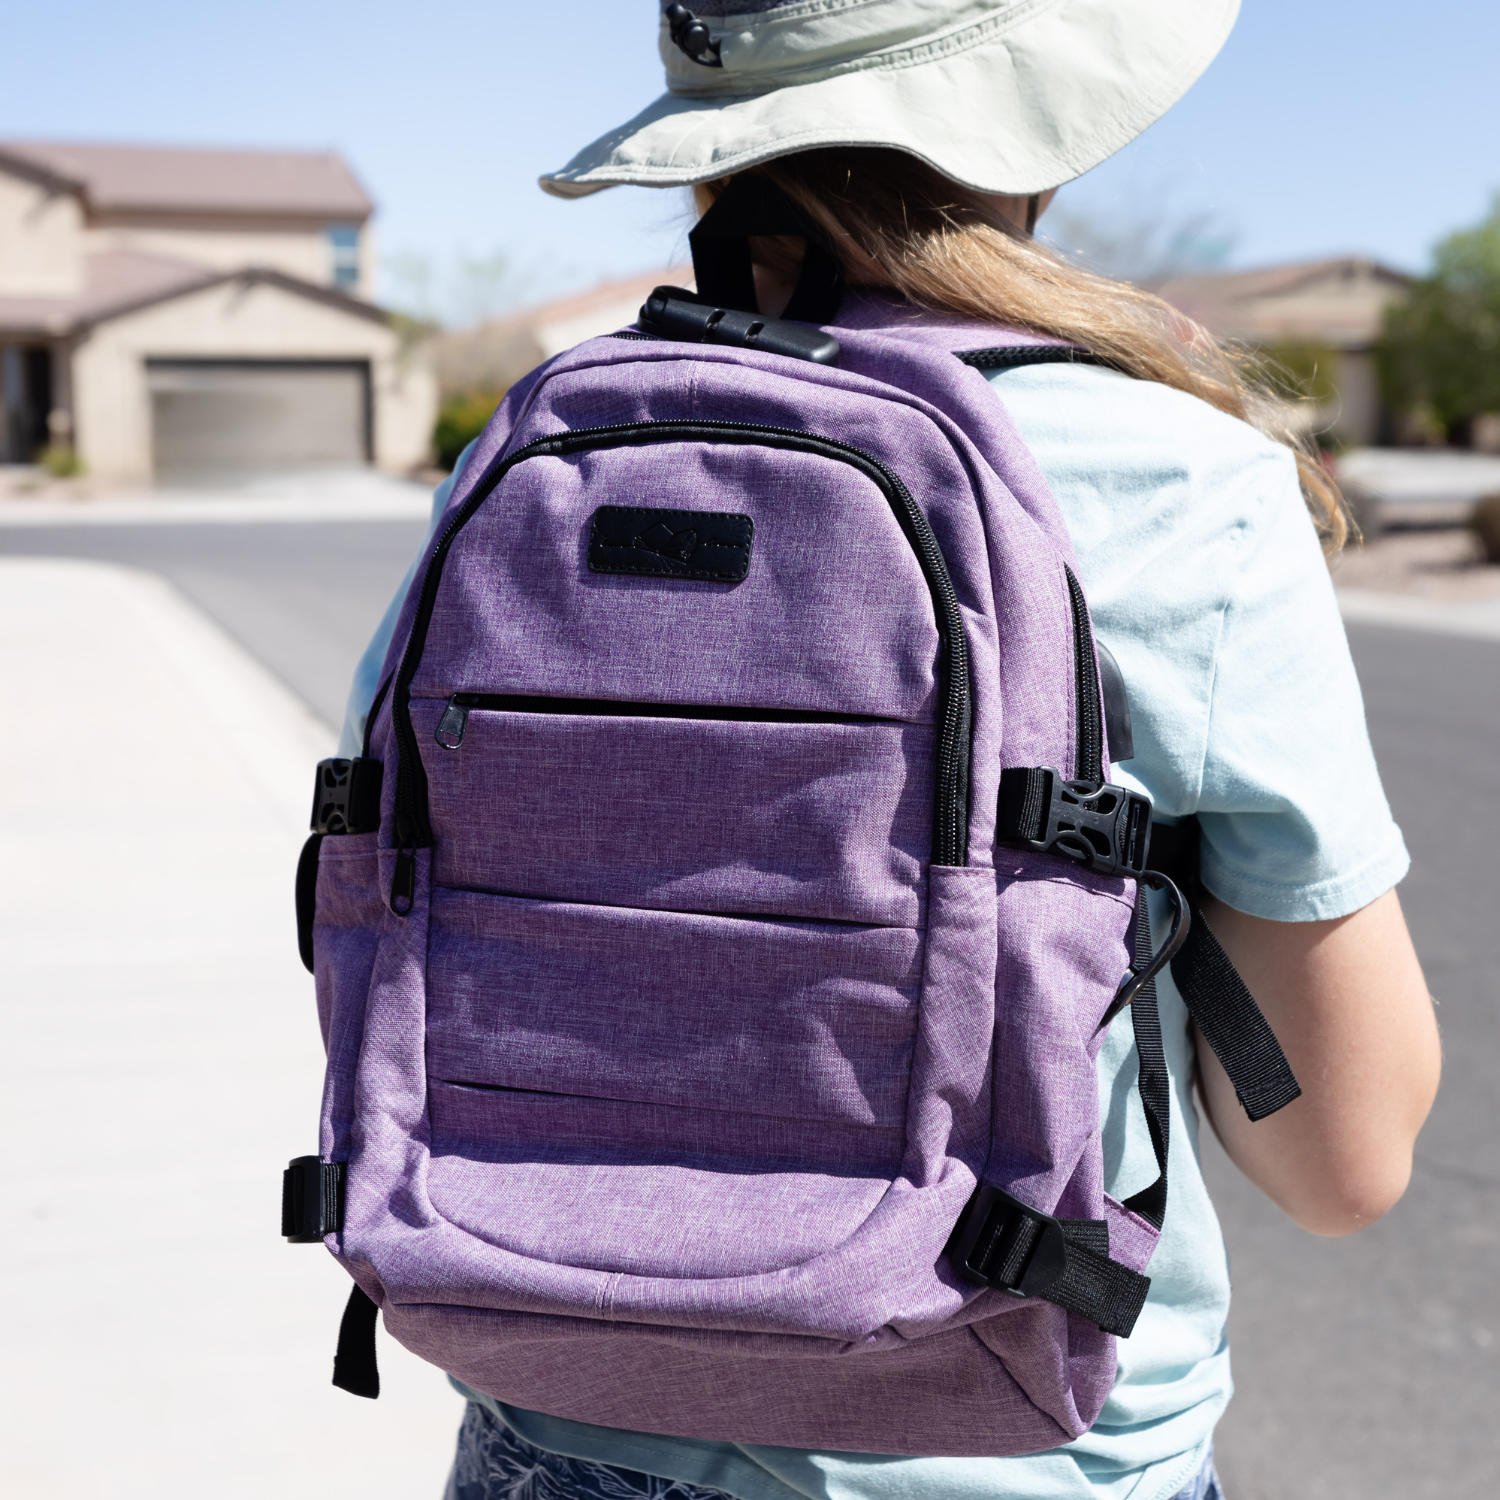 A white child facing away from the camera wears a purple backpack on her back.